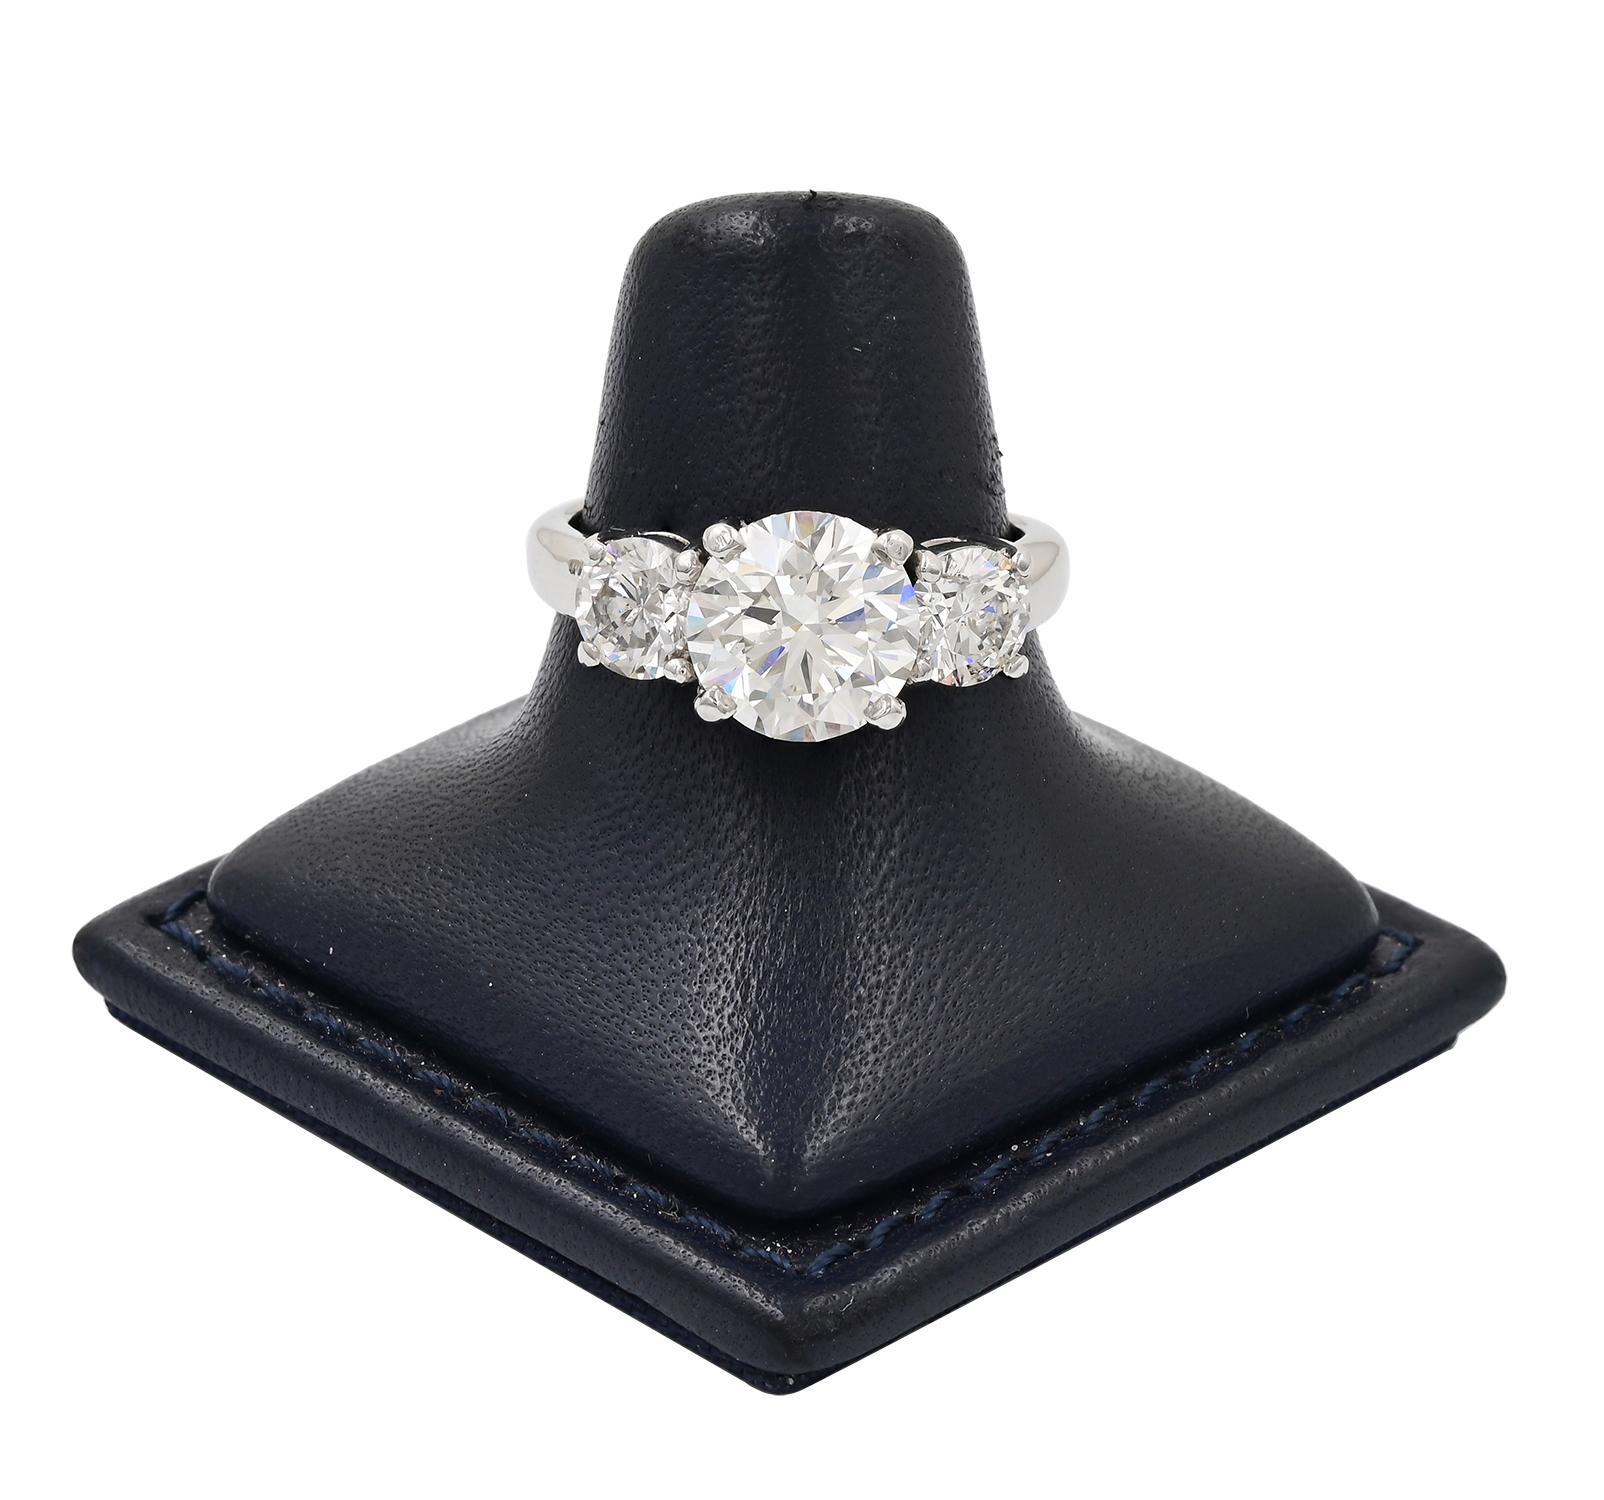 ISSAC NUSSBAUM NEW YORK  3 stone diamond engagement ring In Excellent Condition For Sale In New York, NY